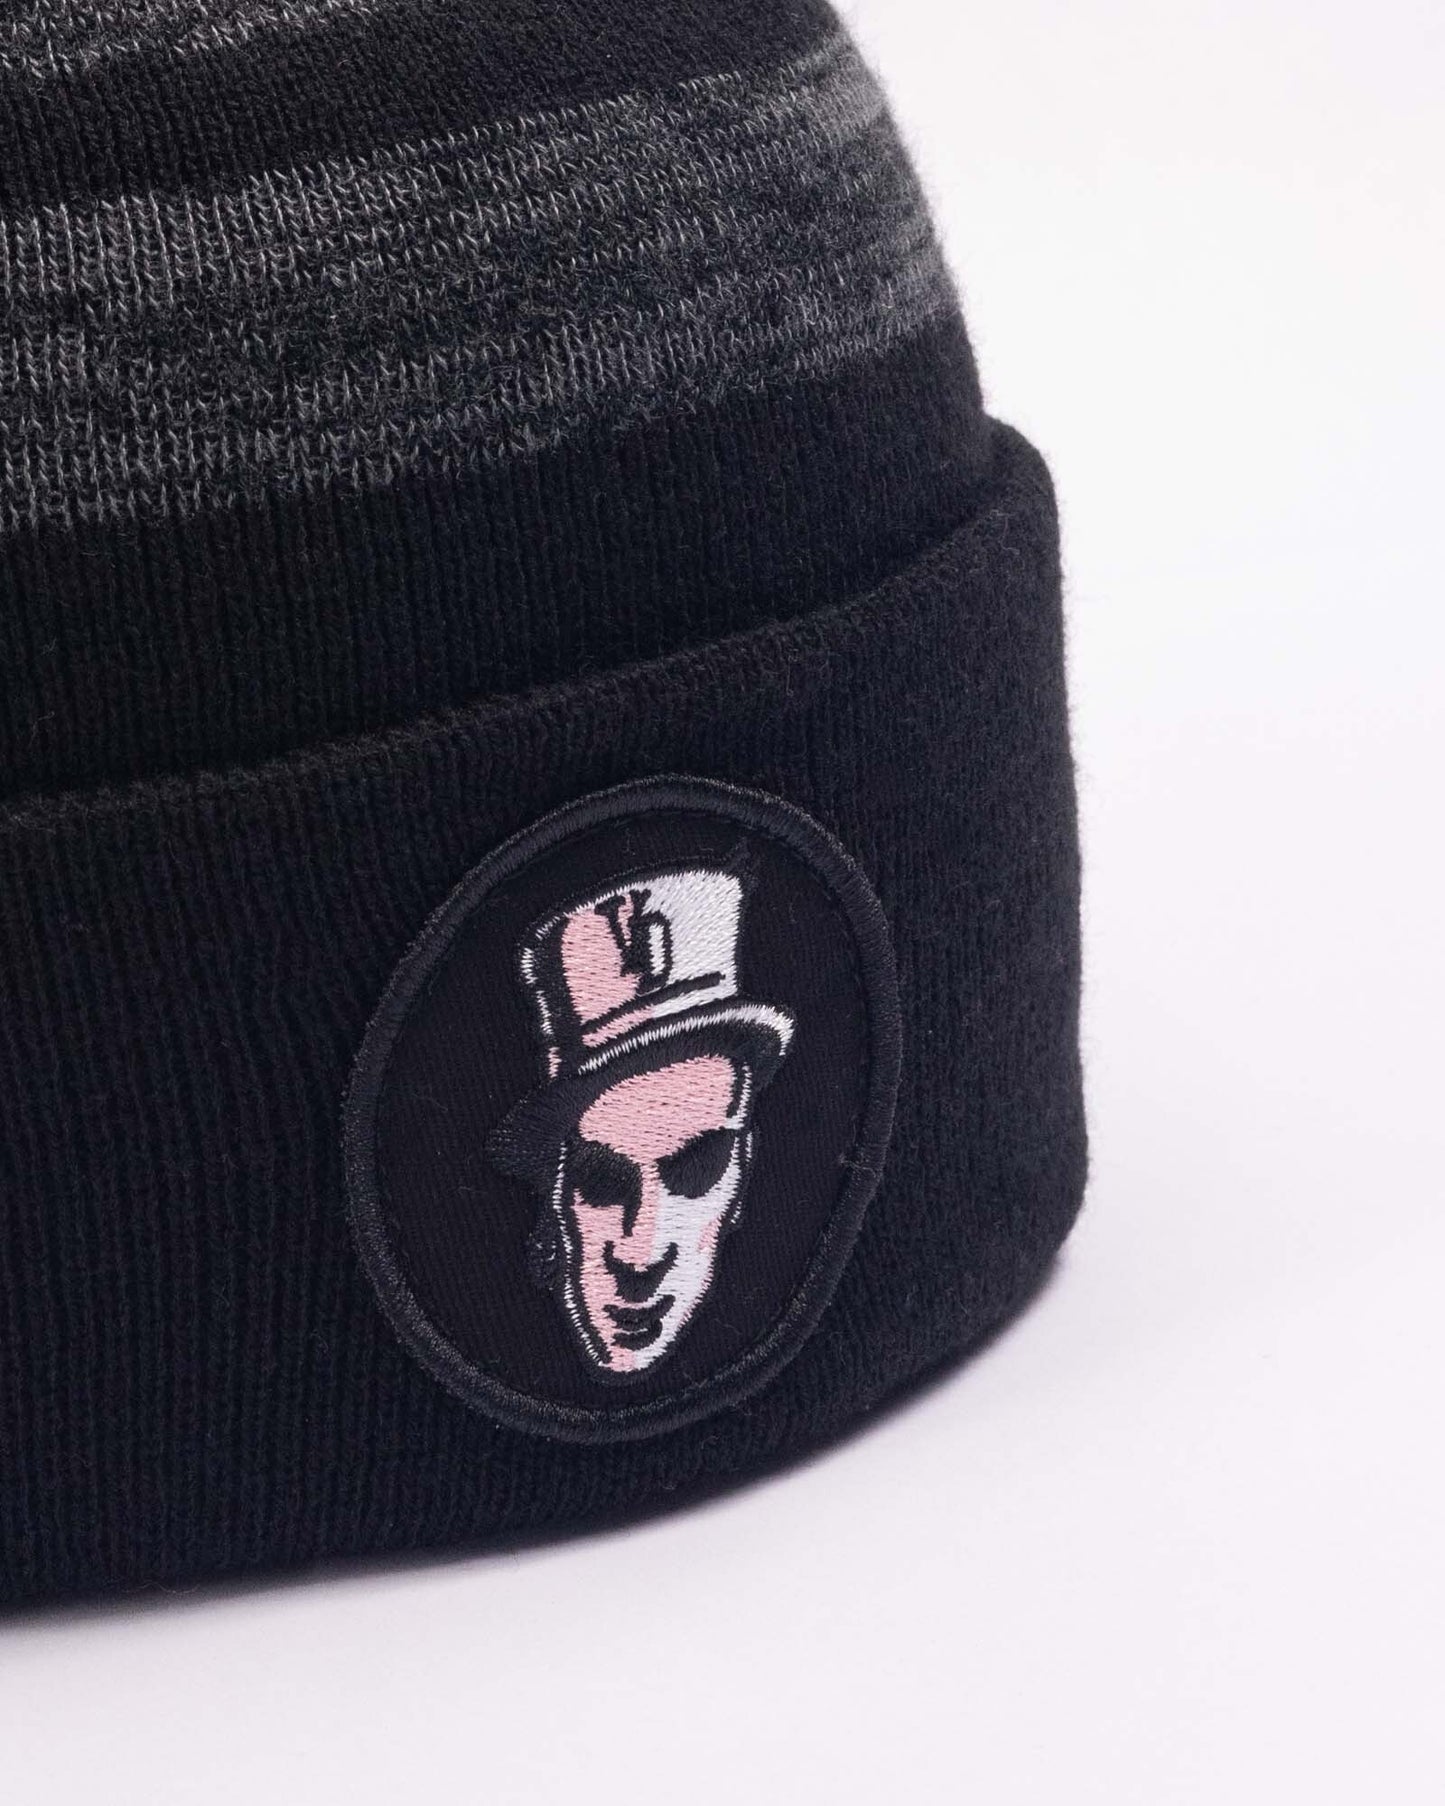 black beanie with voodoo baron patch